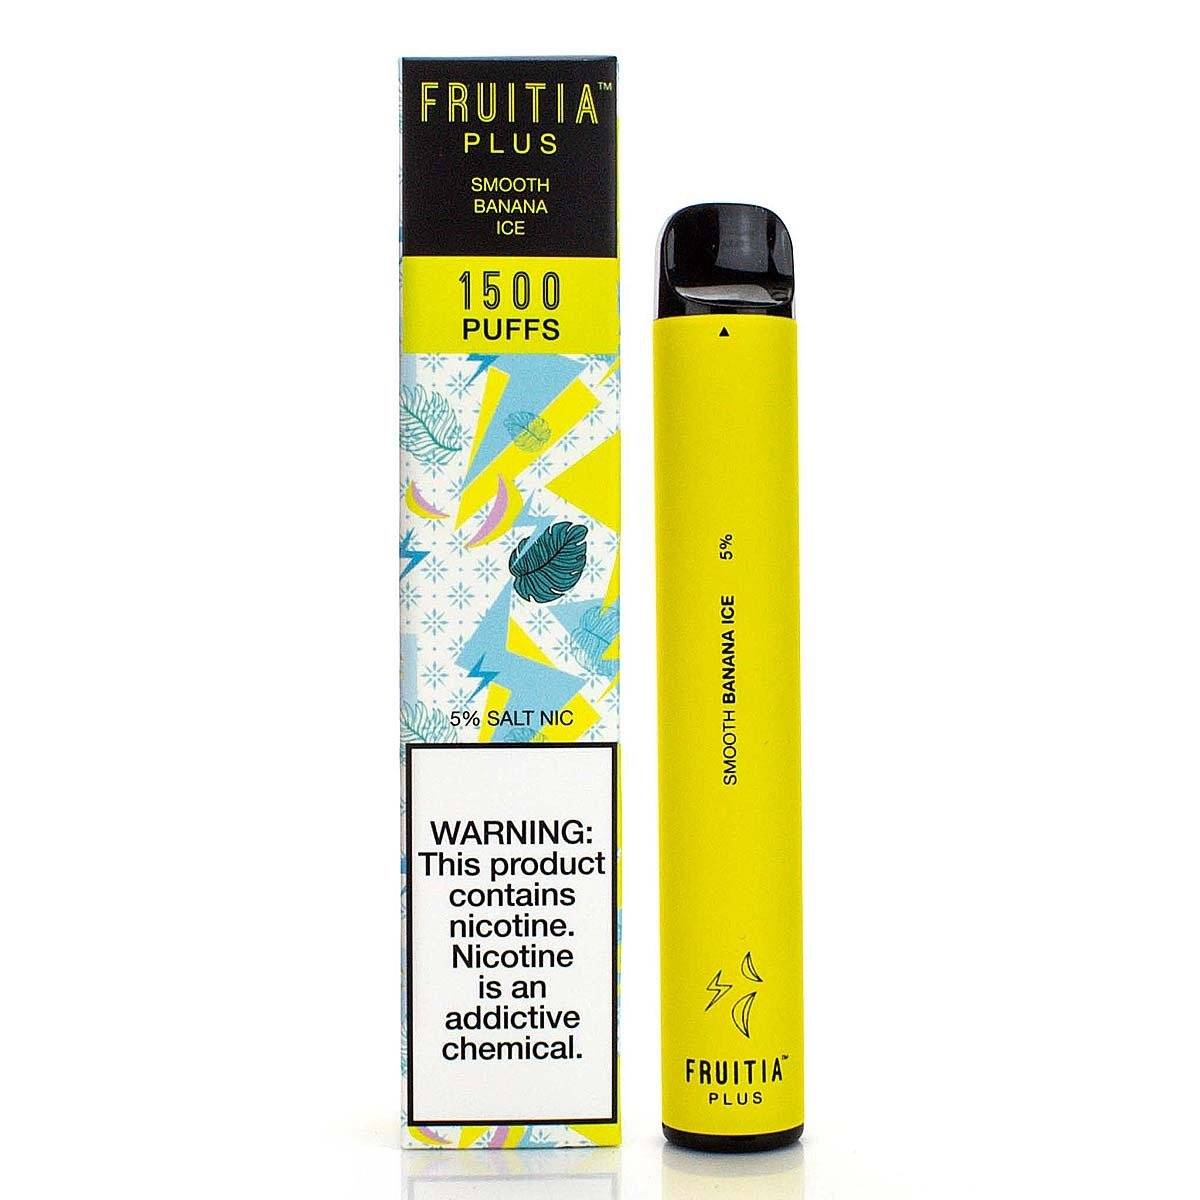 Fruitia Plus Disposable Device | 1500 Puffs Smooth Banana Ice with Packaging